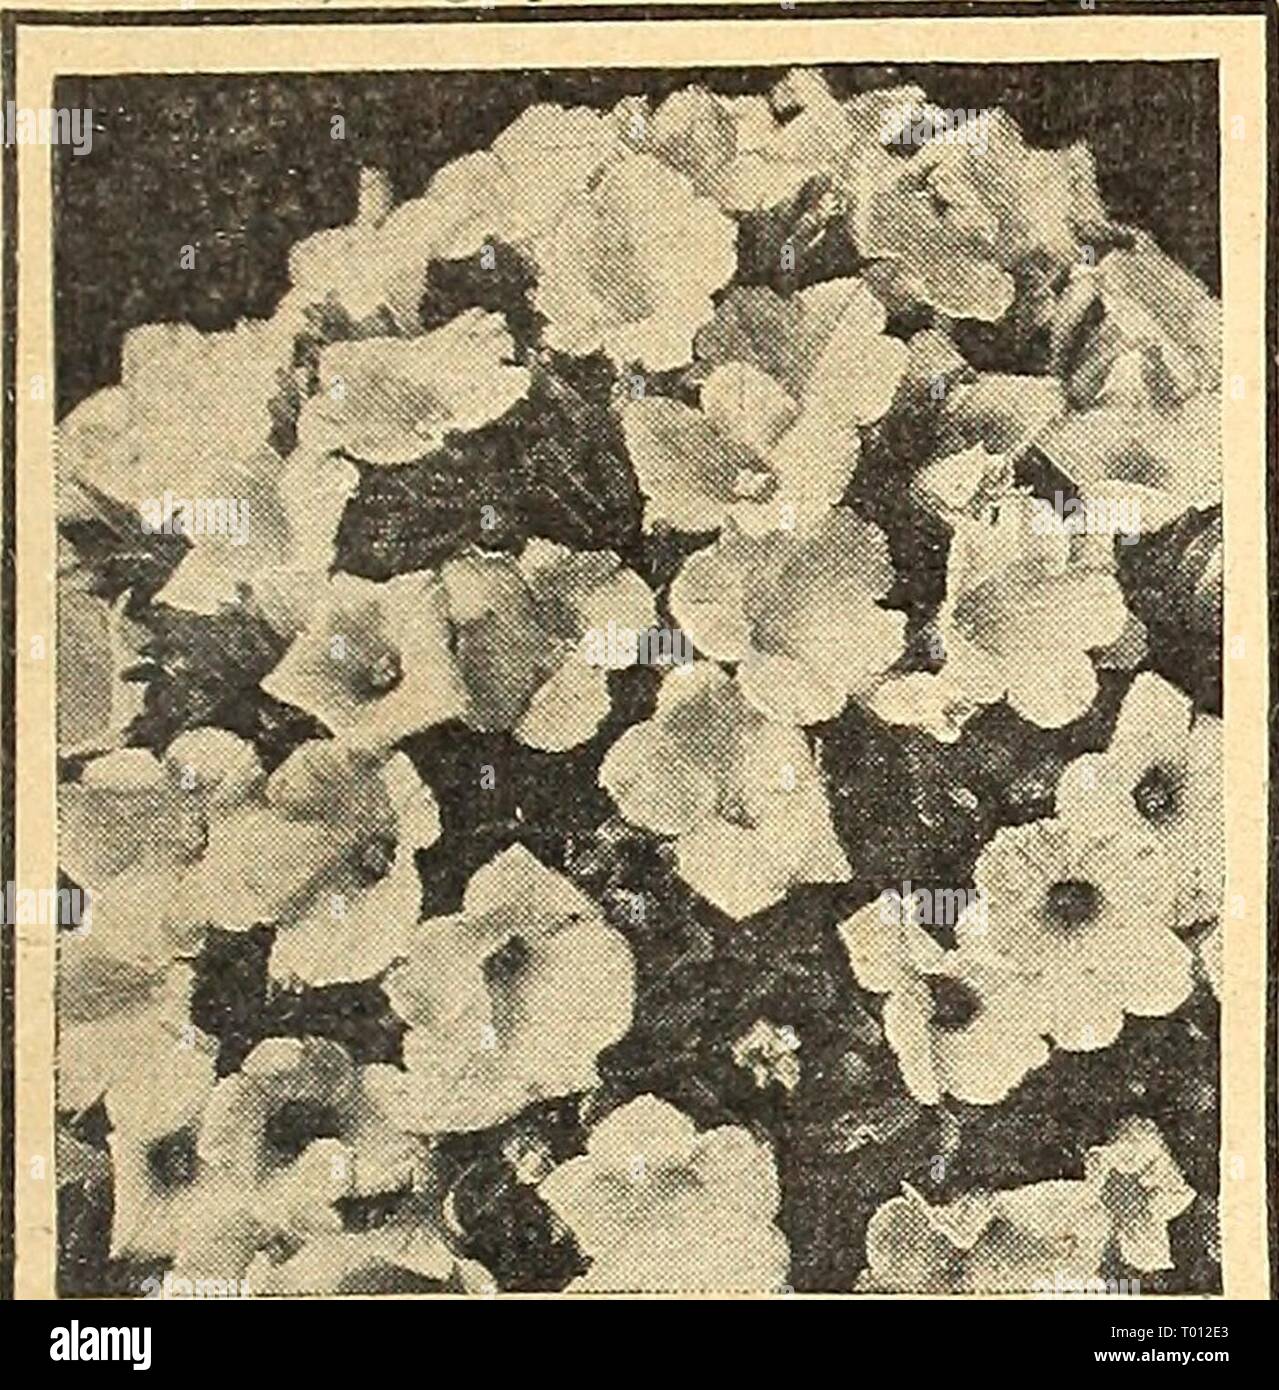 Dreer's garden book for 1943 . dreersgardenbook1943henr Year: 1943  in Flower Seeds for 1943 ^^11 Othake sphaceolata ® A handsome annual of robust growth and quite easy to grow. Has decorative flowers of a pleasing bright rose color. Pkt. 2Sc; large pkt. 60c. Potentilla t^'^^—CinquefoU 3680 Single Hybrids Mixed. Graceful plants a foot high with attractive, dark green, divided leaves and showy flow- ers in a wide range of bright colors. Pkt. 15c; large pkt. 75c.    Miniature Petunias The plants grow only about 6 inches tall and are splendid for narrow beds and borders. 3295 Pink Gem. Covered wi Stock Photo